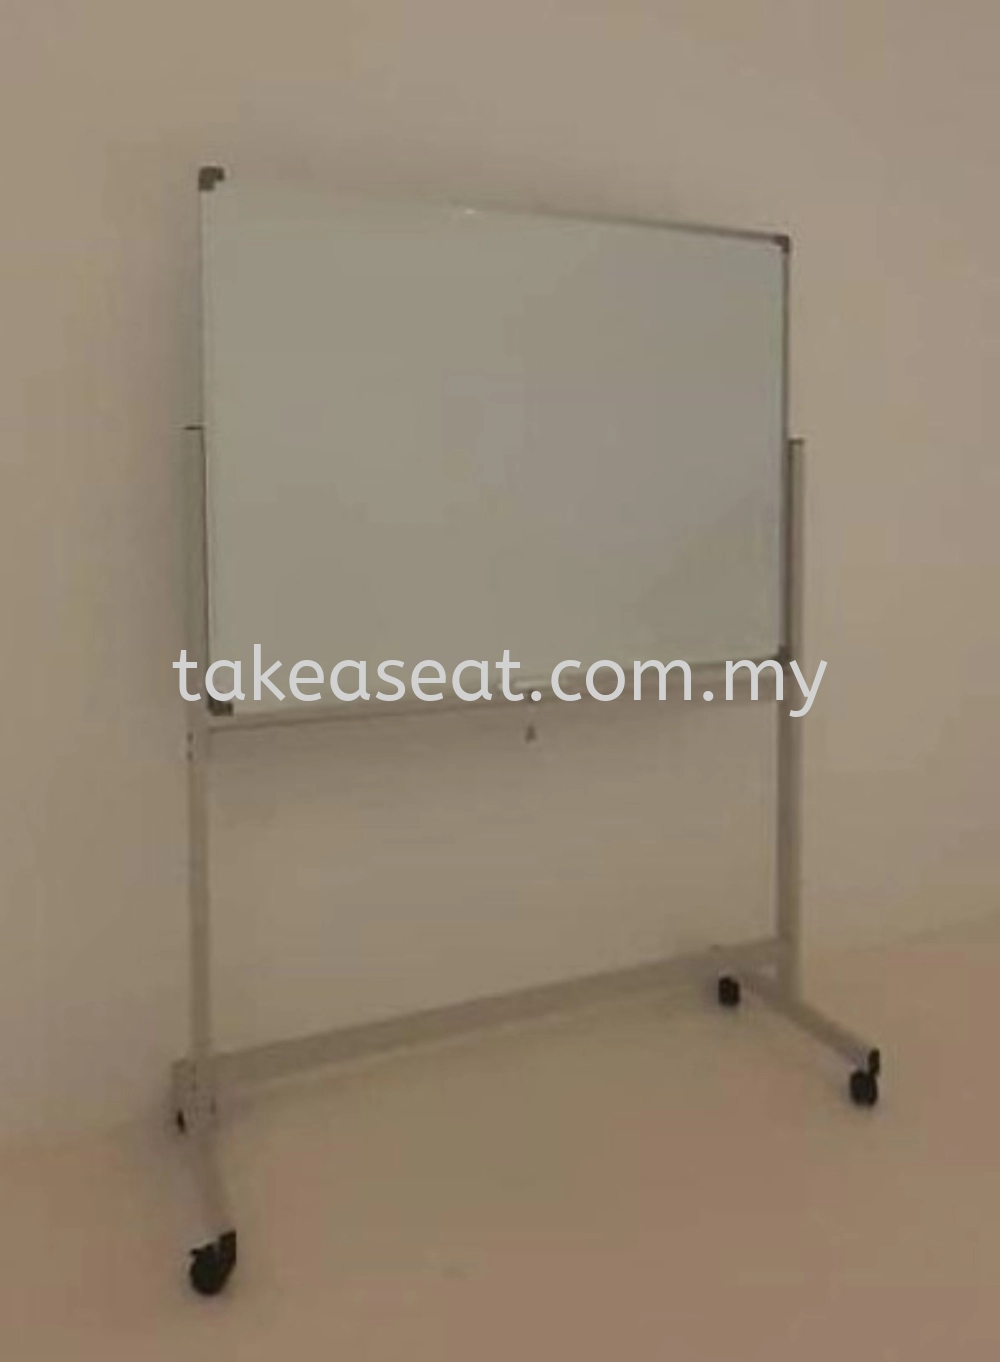 MOBILE DOUBLE SIDED MAGNETIC WHITEBOARD 4' X 3'